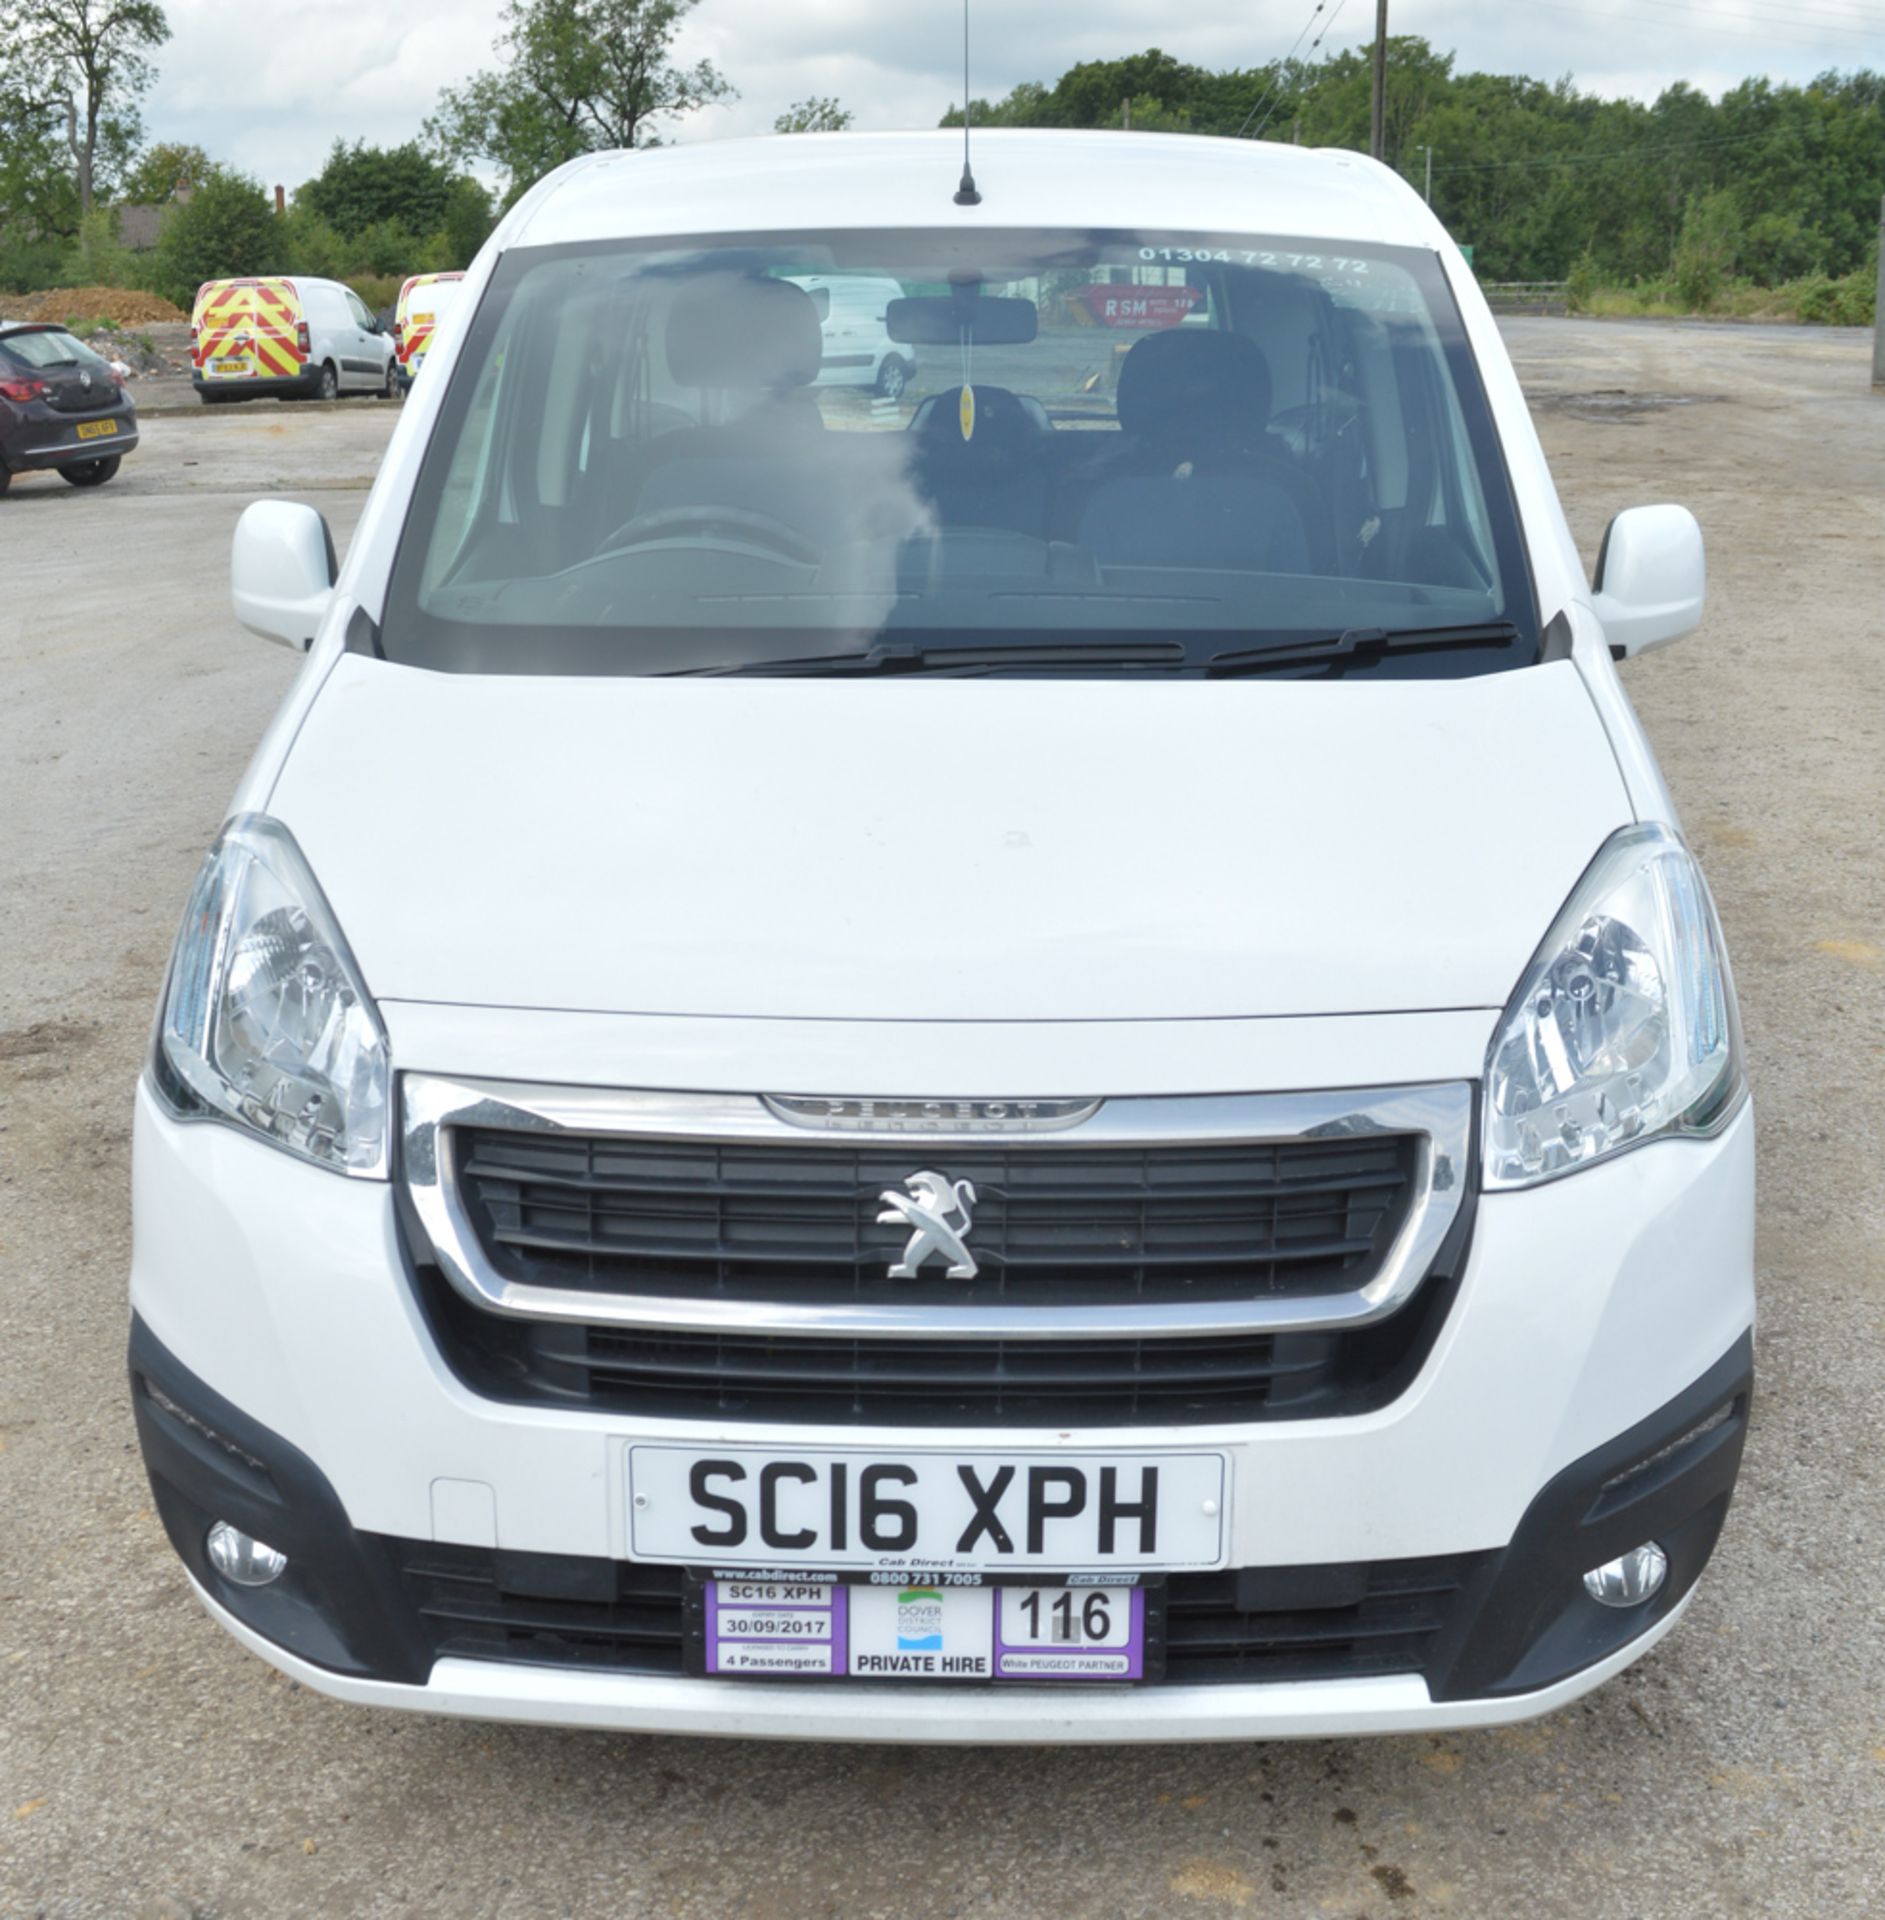 Peugeot Partner Tepee Active Blue automatic 5 seat MPV Registration number: SC16 XPH  Date of - Image 5 of 12